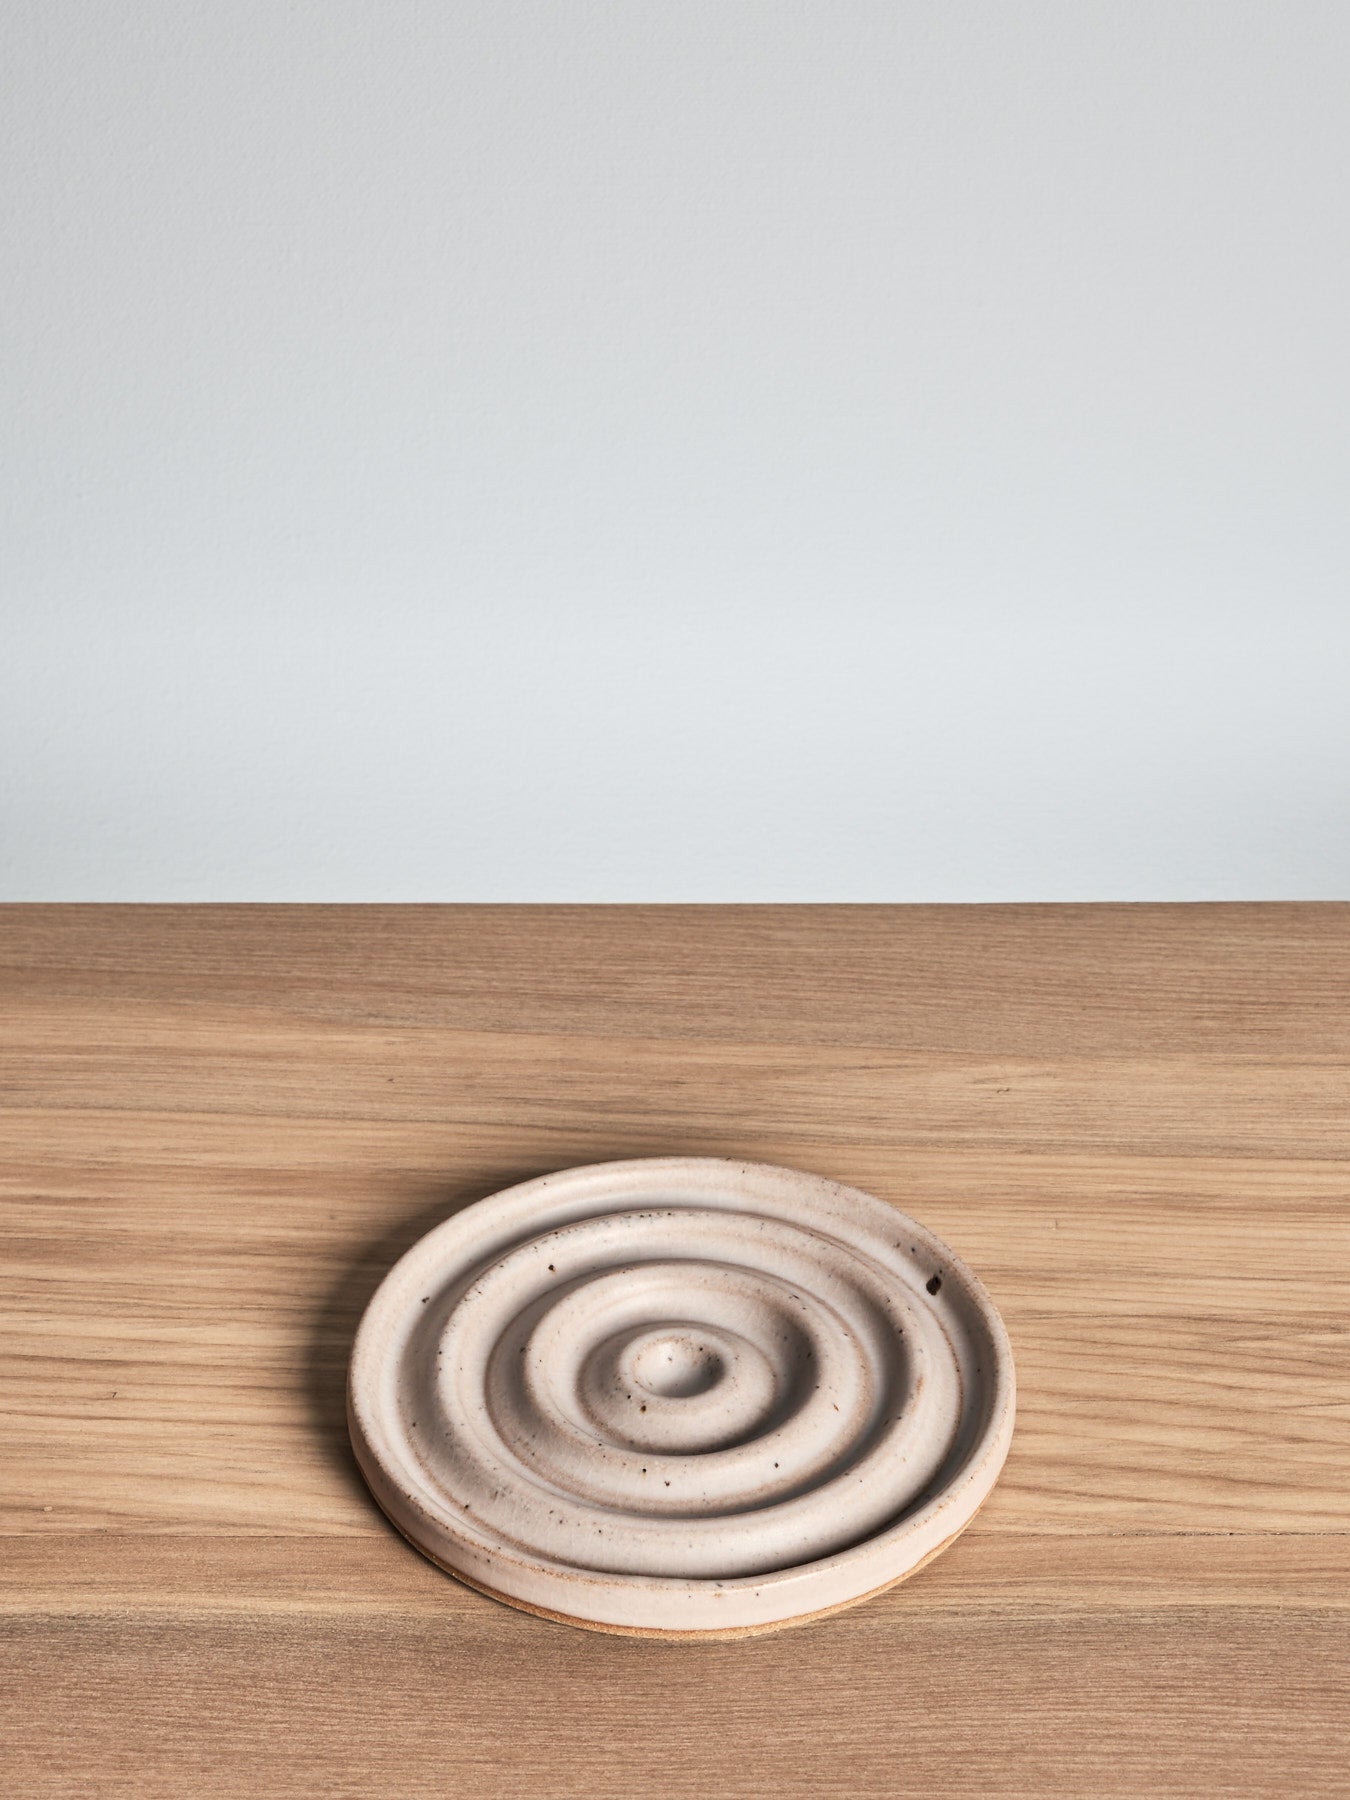 A Soap Dish – Cloud by deborah sweeney on top of a wooden table.